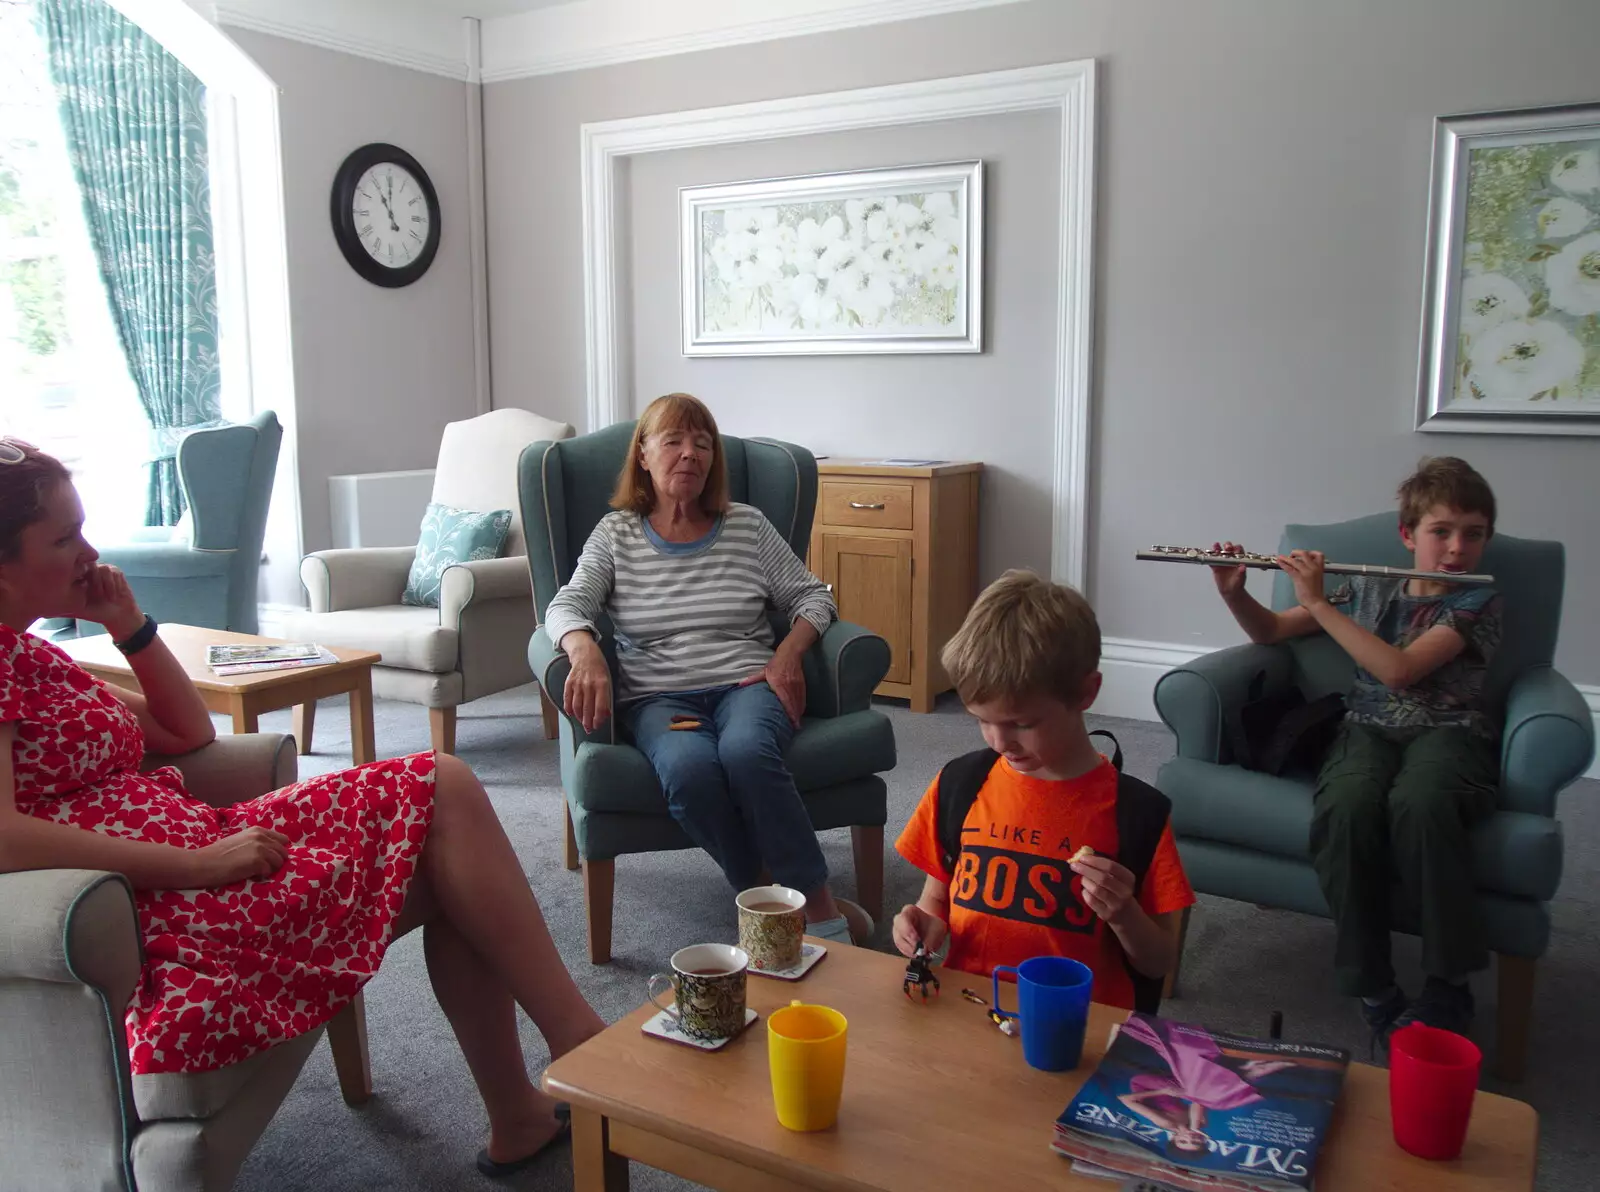 Fred plays some flute for Grandma J, from Chagford Lido and a Trip to Parke, Bovey Tracey, Devon - 25th May 2019